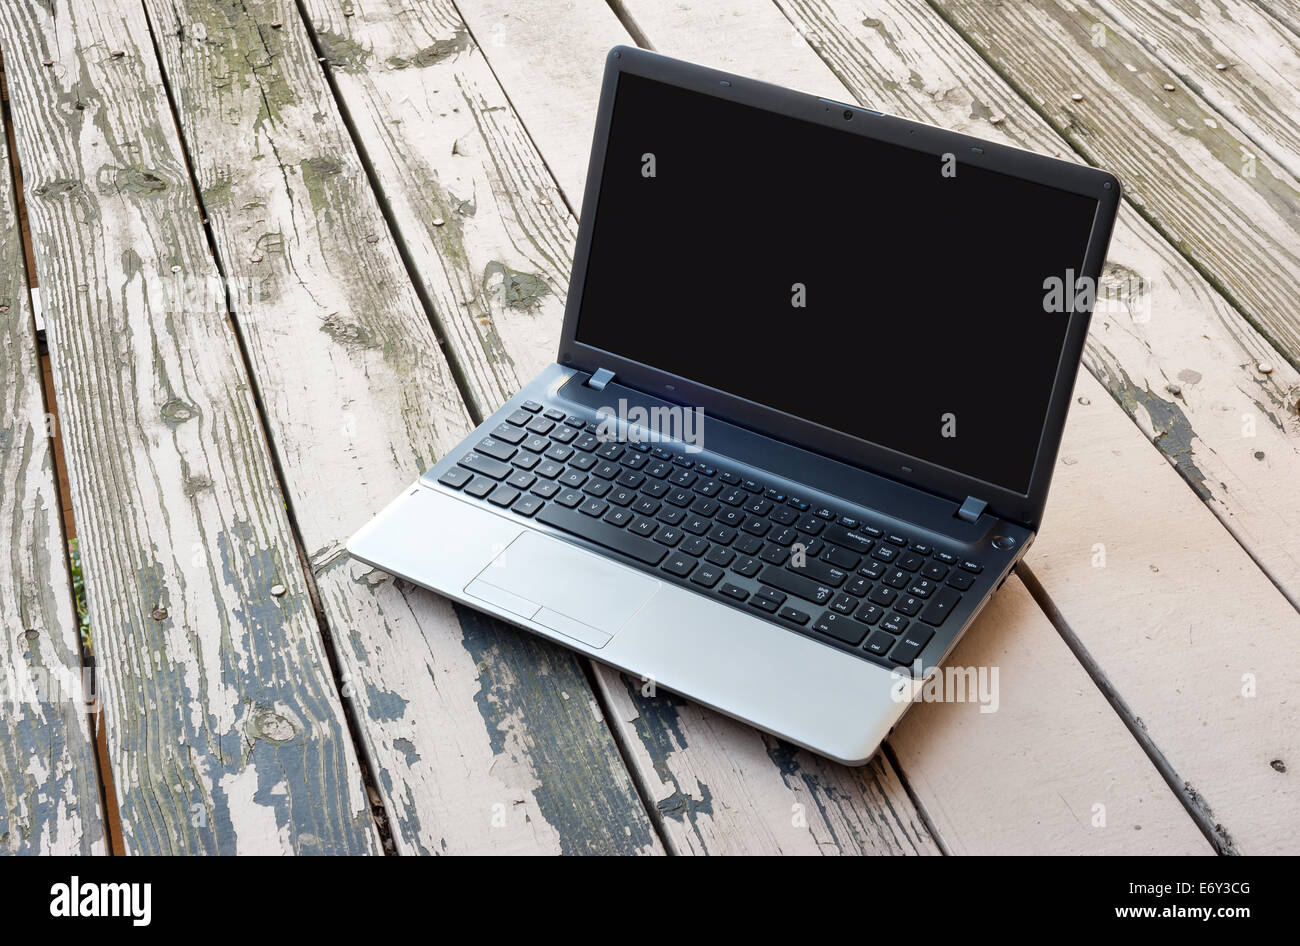 Laptop with black screen on the wooden table Stock Photo